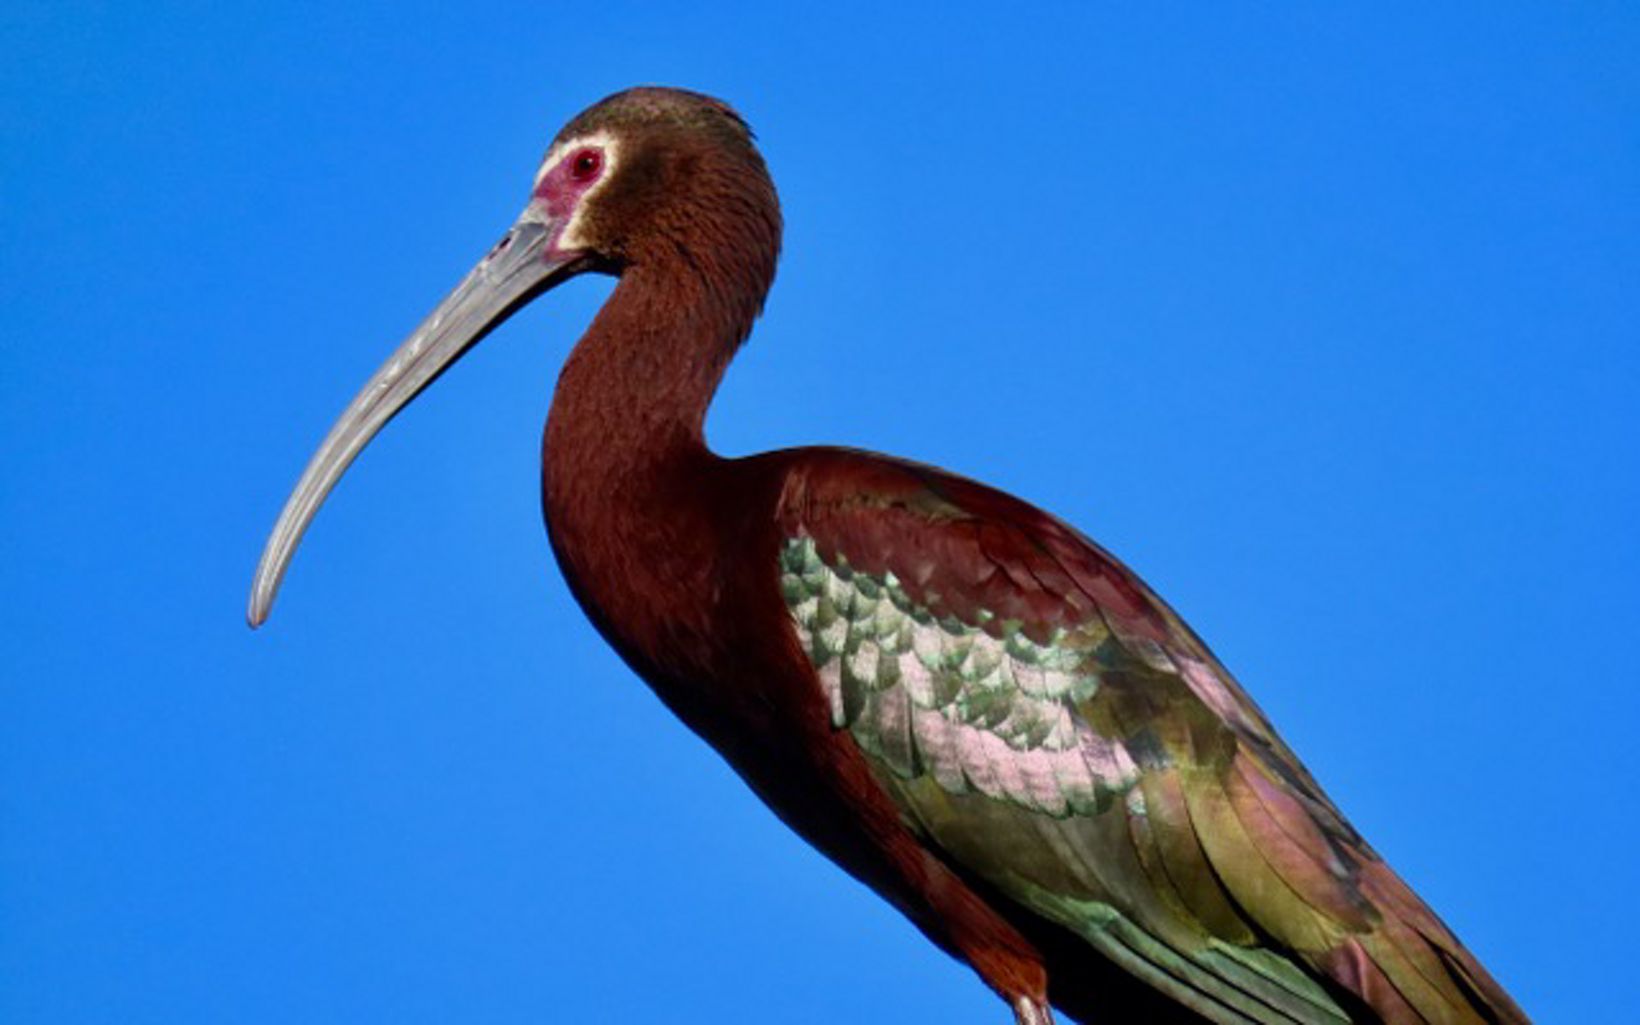 Stunning biodiversity Many species of birds and wildlife can be seen at the preserve, like the white-faced ibis. © Len Warren/TNC 